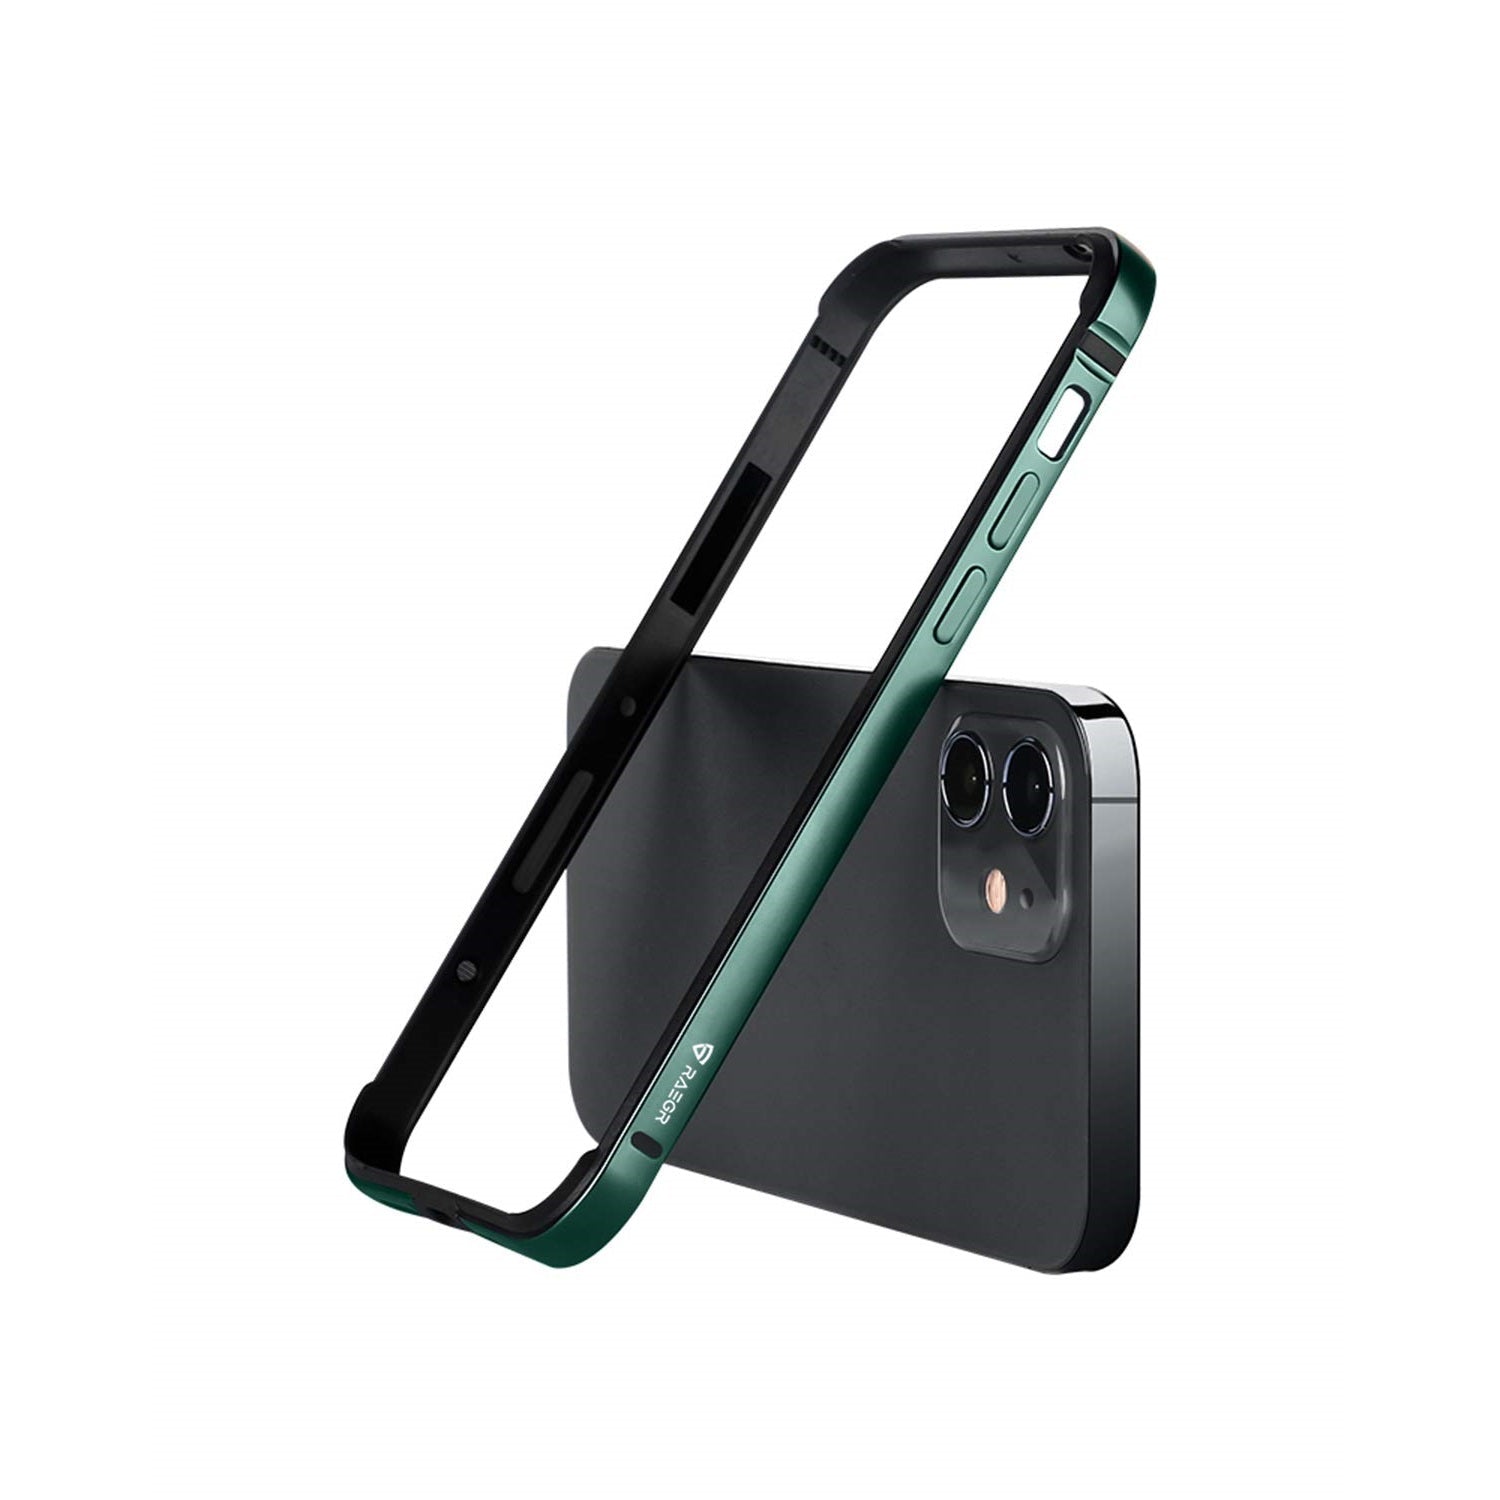 Raegr Bumper Case For Apple Iphone 12 And Apple Iphone 12 Pro